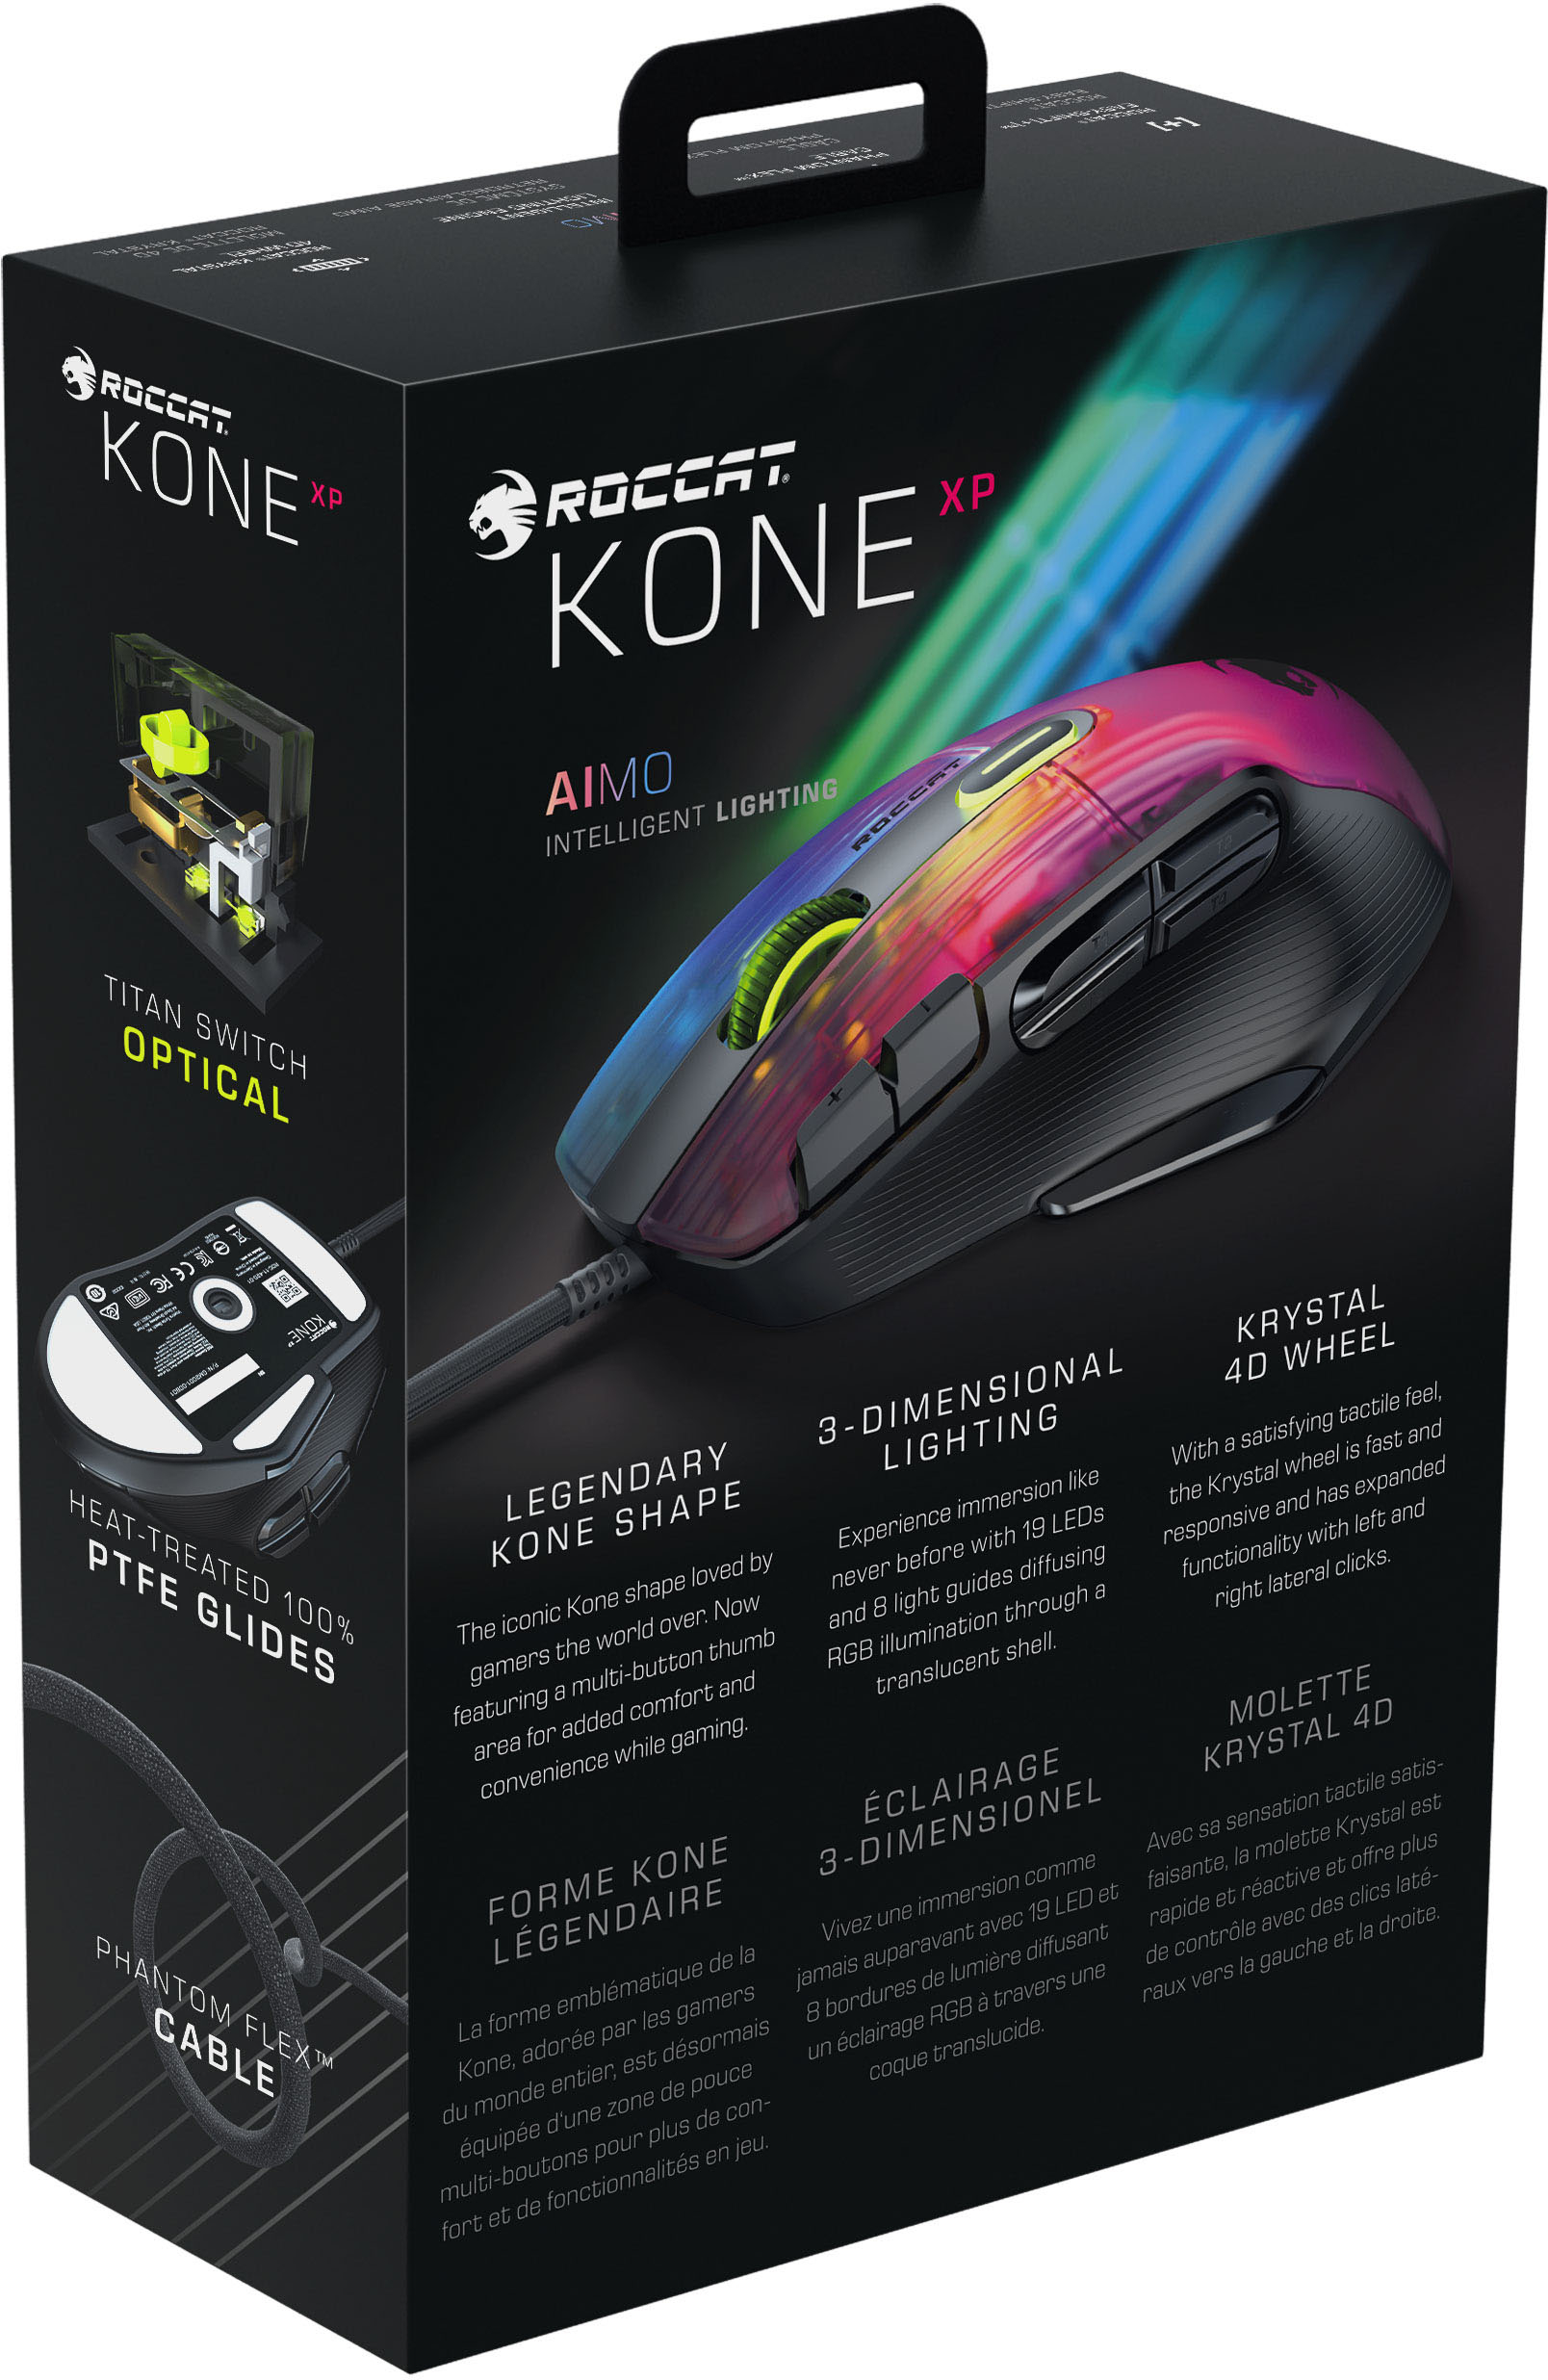 ROCCAT Kone XP with ROC-11-420-01 & design AIMO Wired Best Buy Mouse RGB Gaming Black Optical multi-button - Ambidextrous lighting